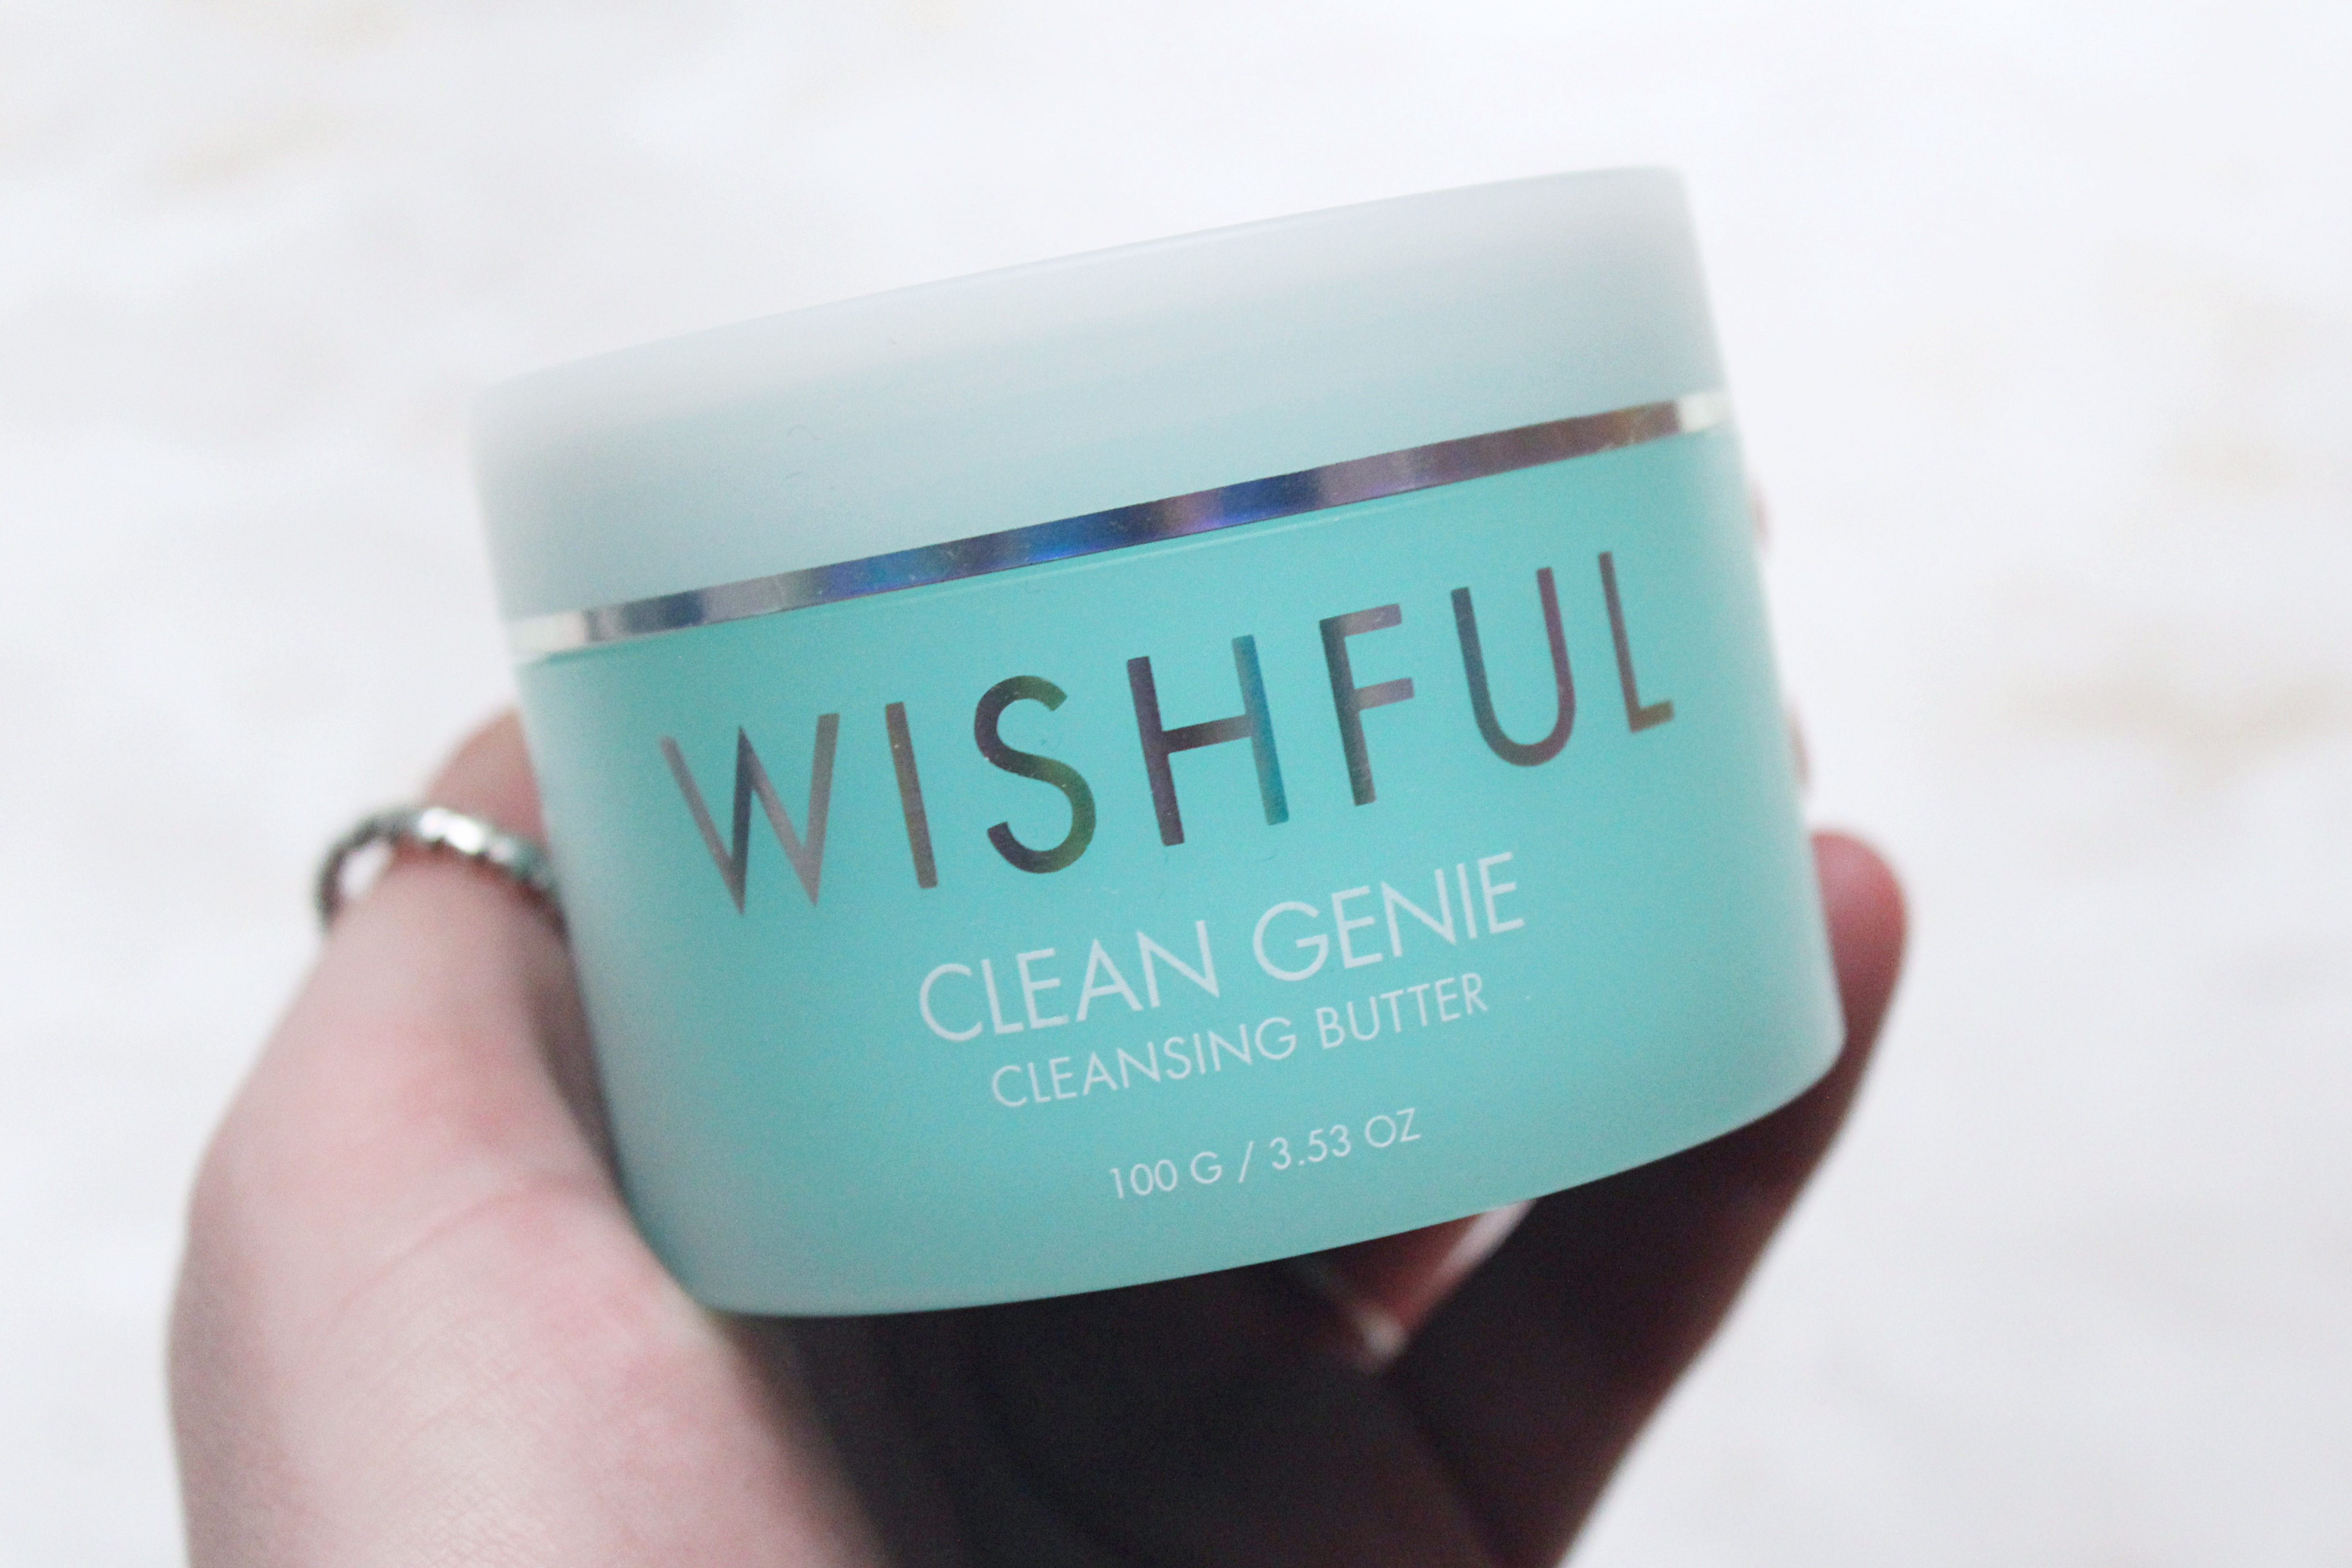 Wishful Clean Genie Cleansing Butter Review